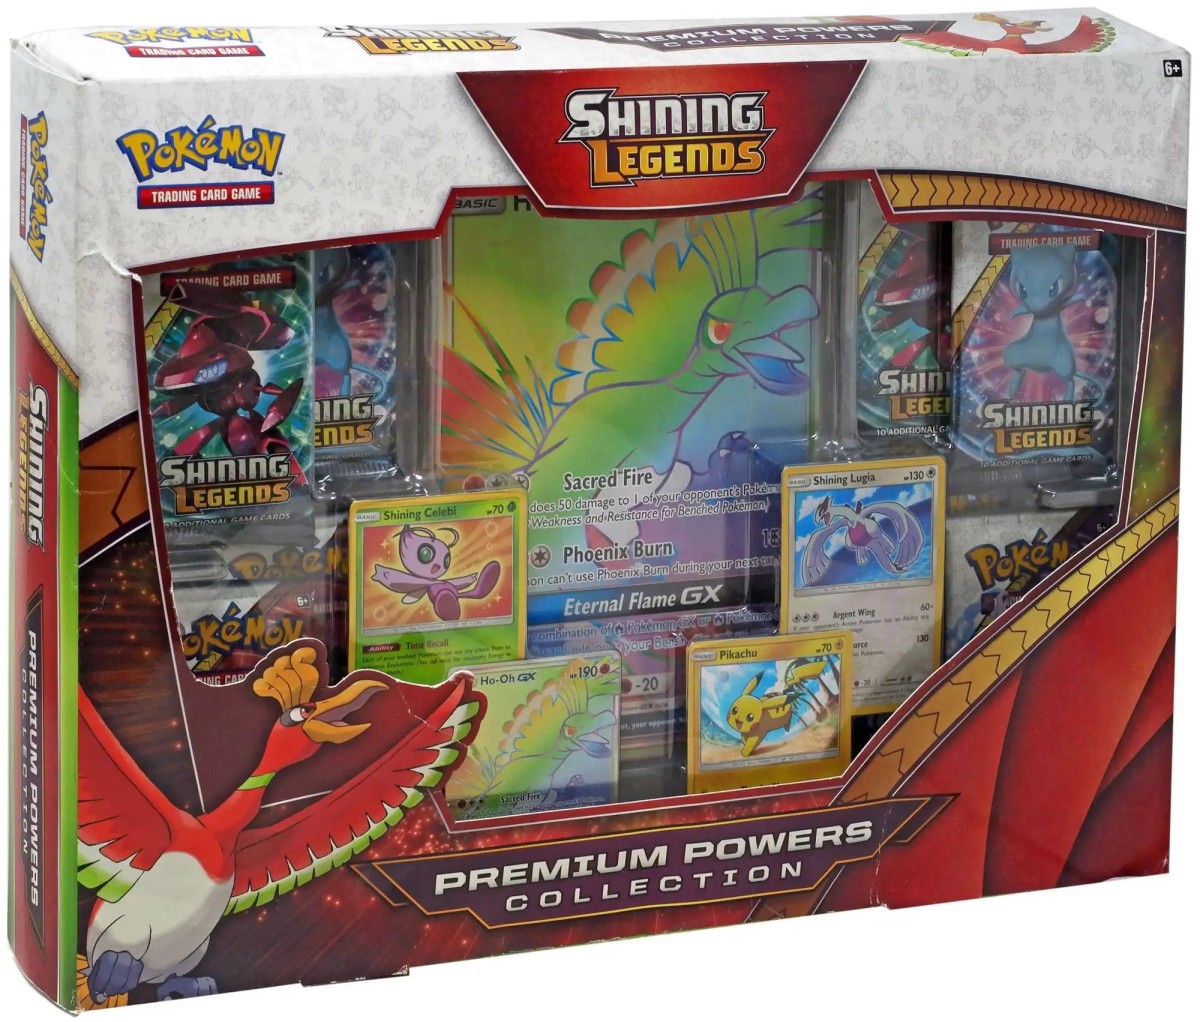 Shining Legends premium powers collection